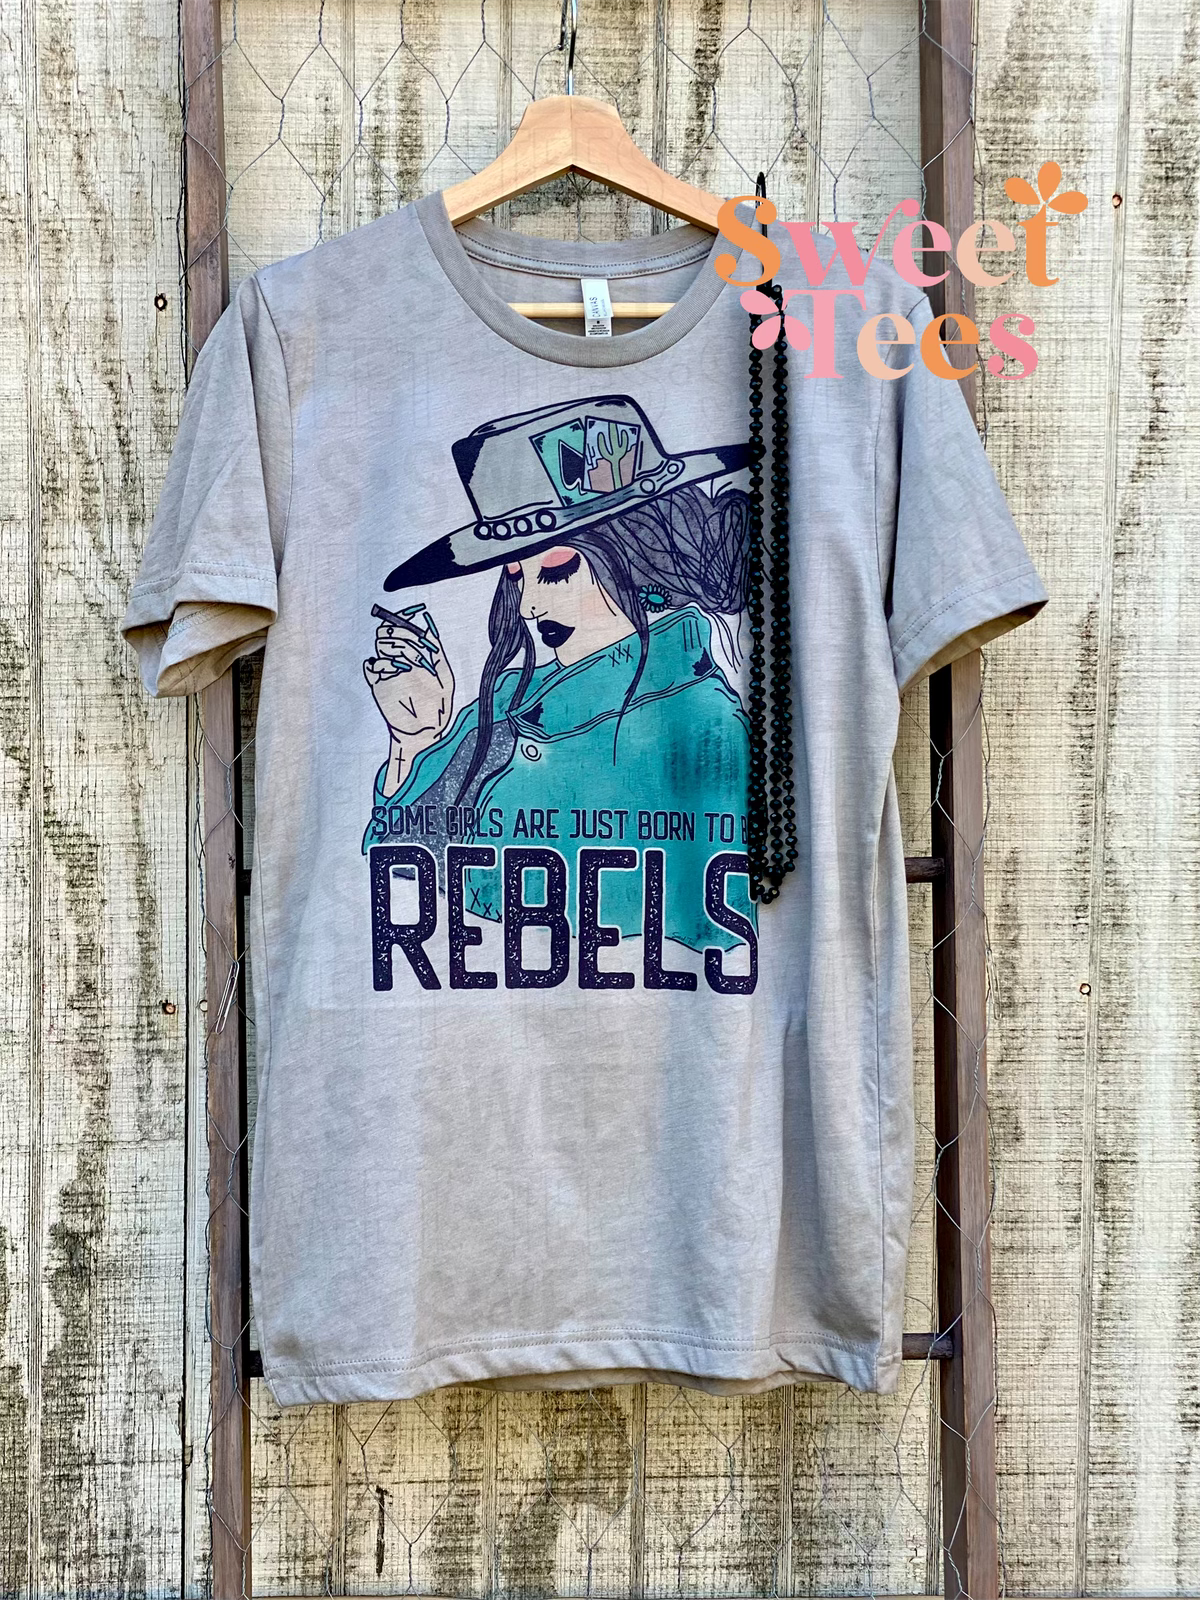 Born to be Rebels tee